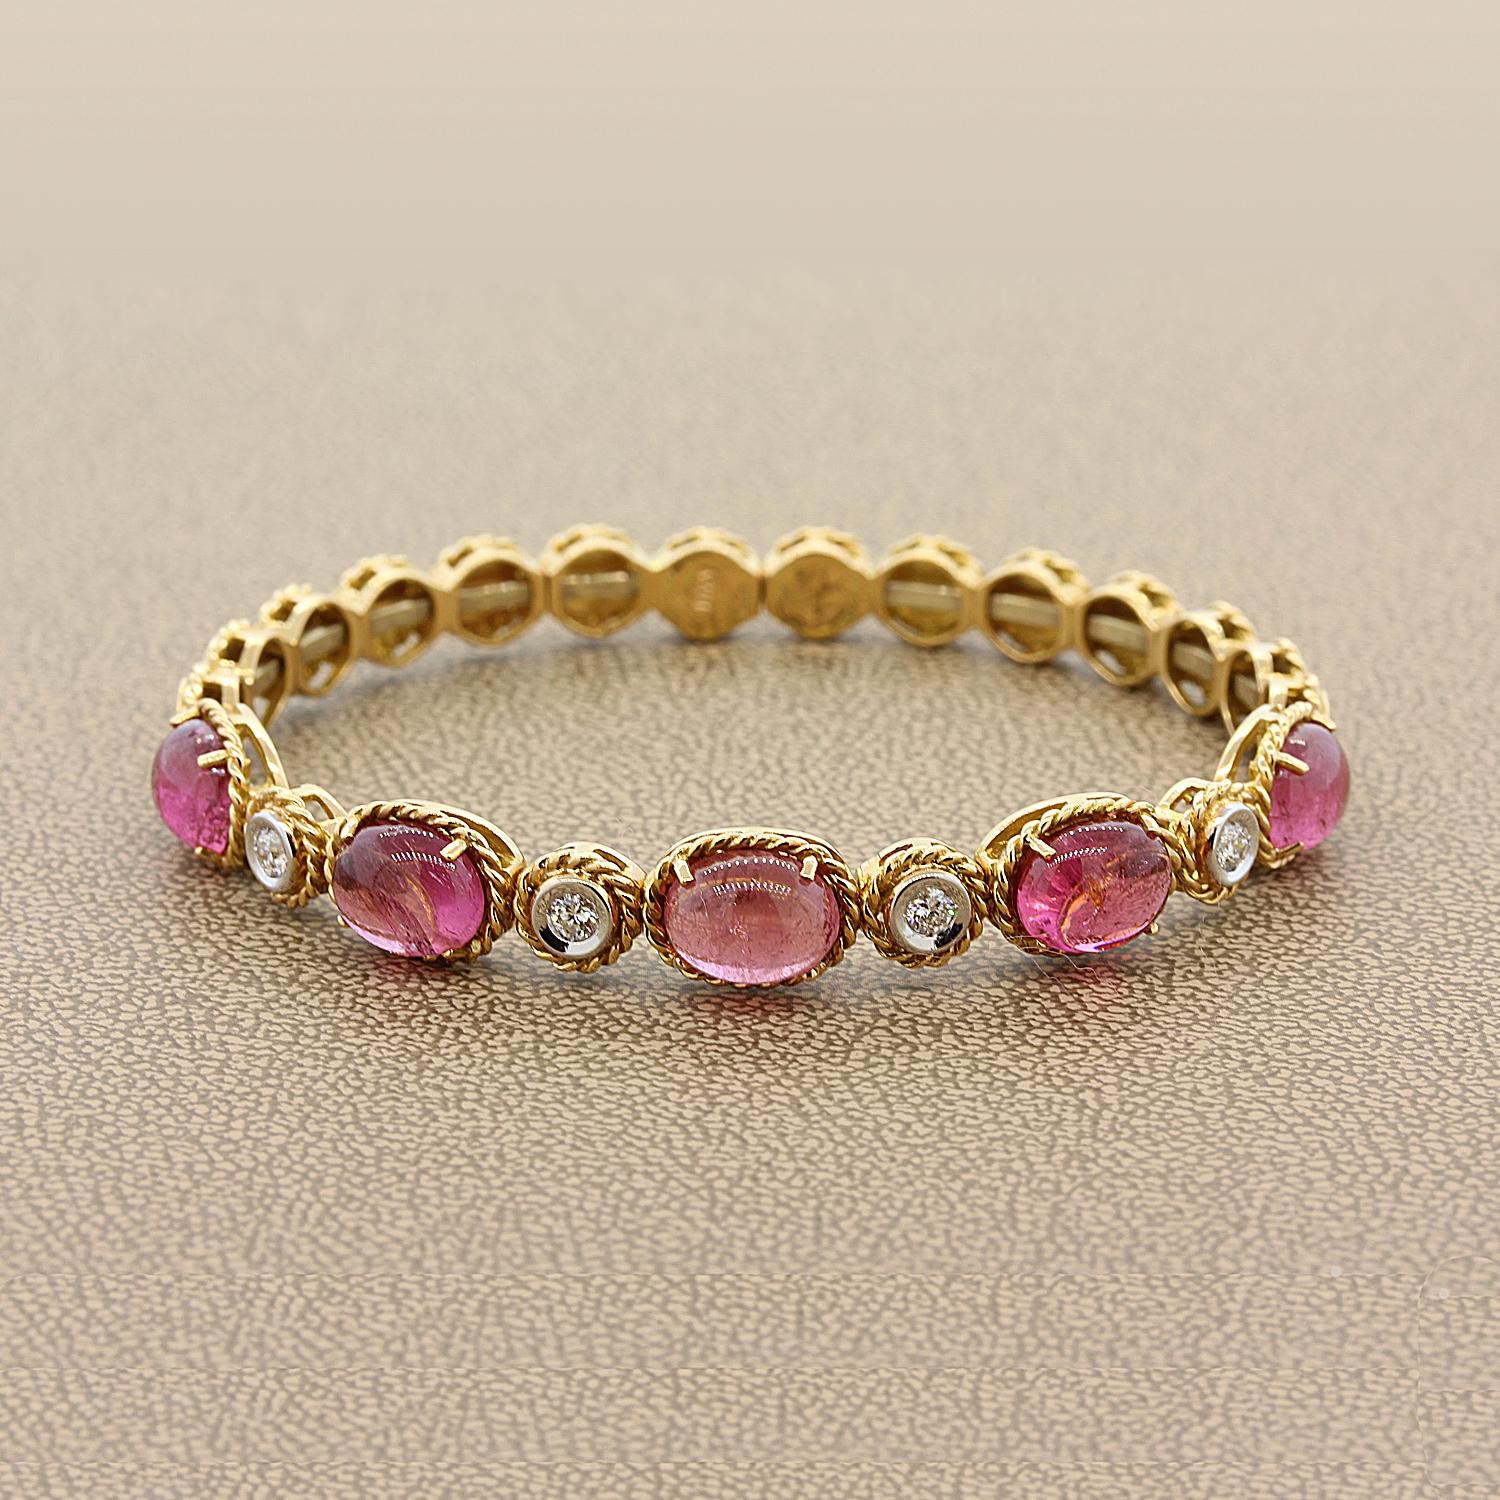 An Italian piece featuring 10.15 carats of smooth pink cabochon tourmaline and 0.32 carats of round cut diamonds. The gems are set in an 18K gold stretch mounting allowing it to fit most wrists. The back of the bracelet is open.

